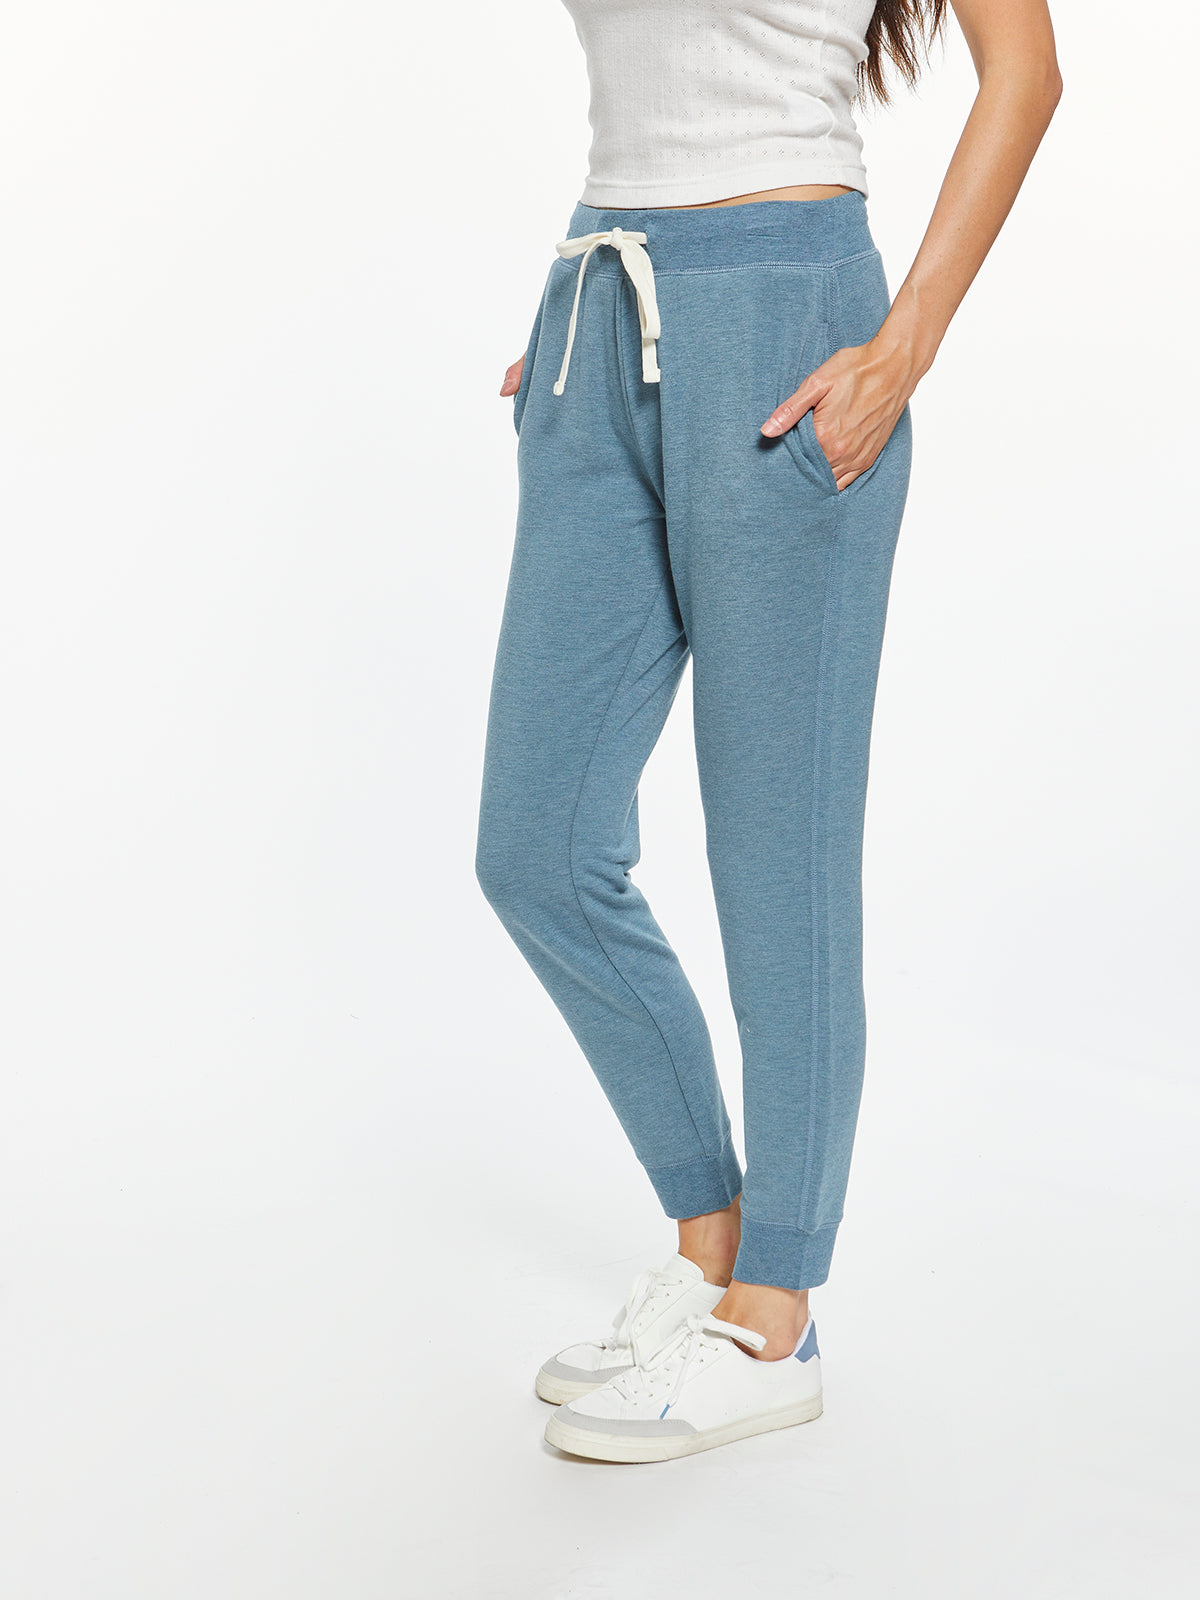 JACEY JOGGER - PRE PACK 6 UNITS